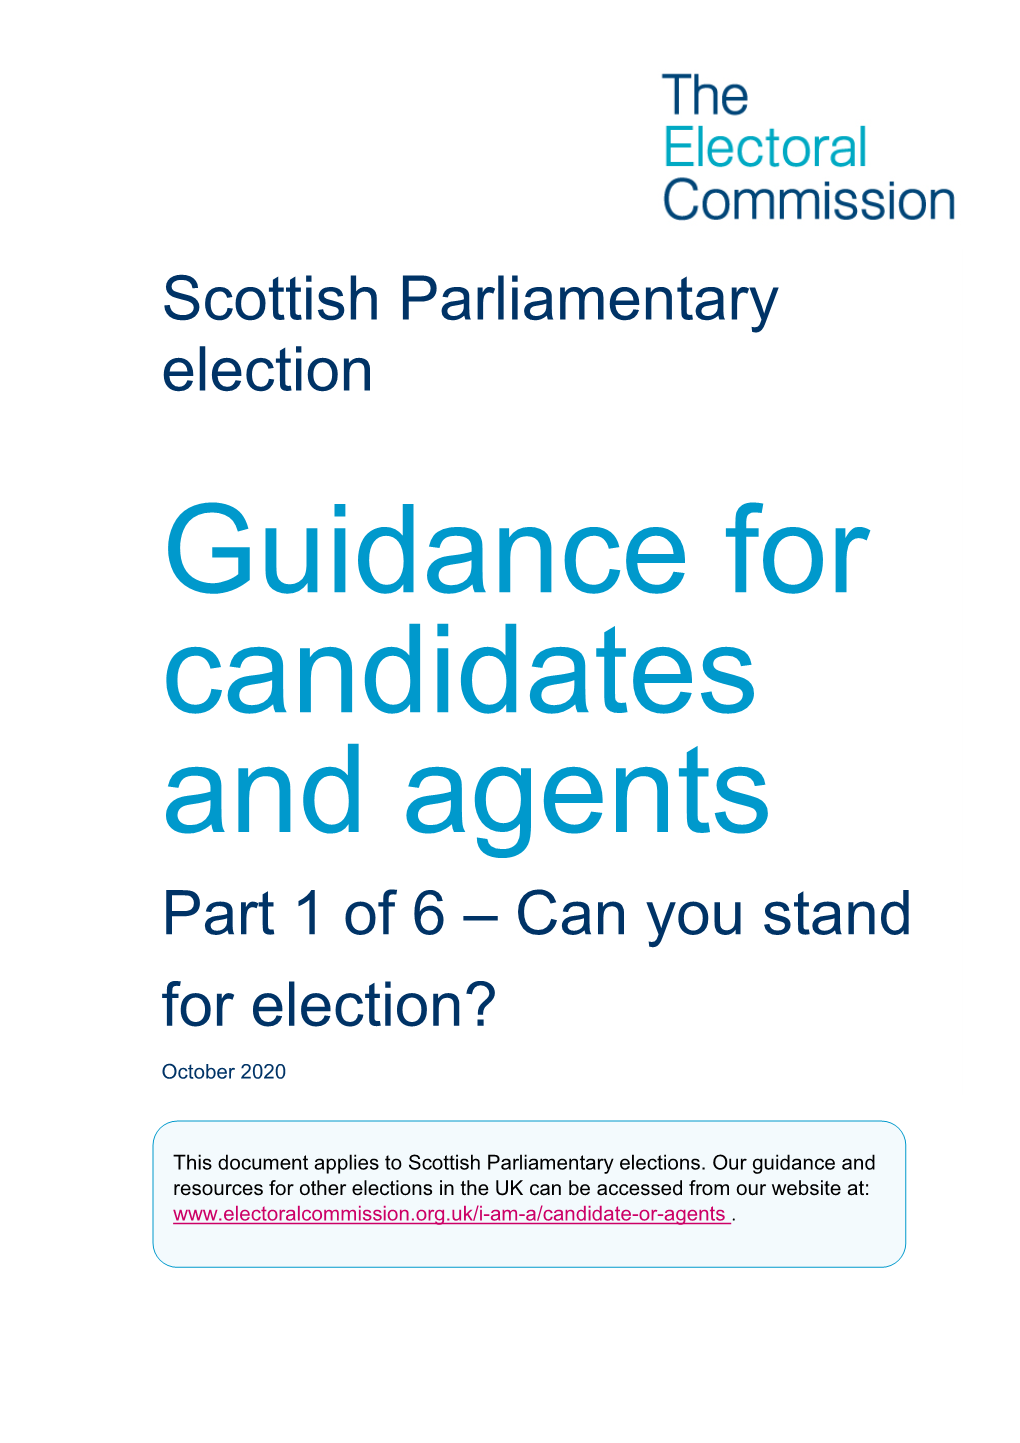 Part 1 of 6 – Can You Stand for Election?